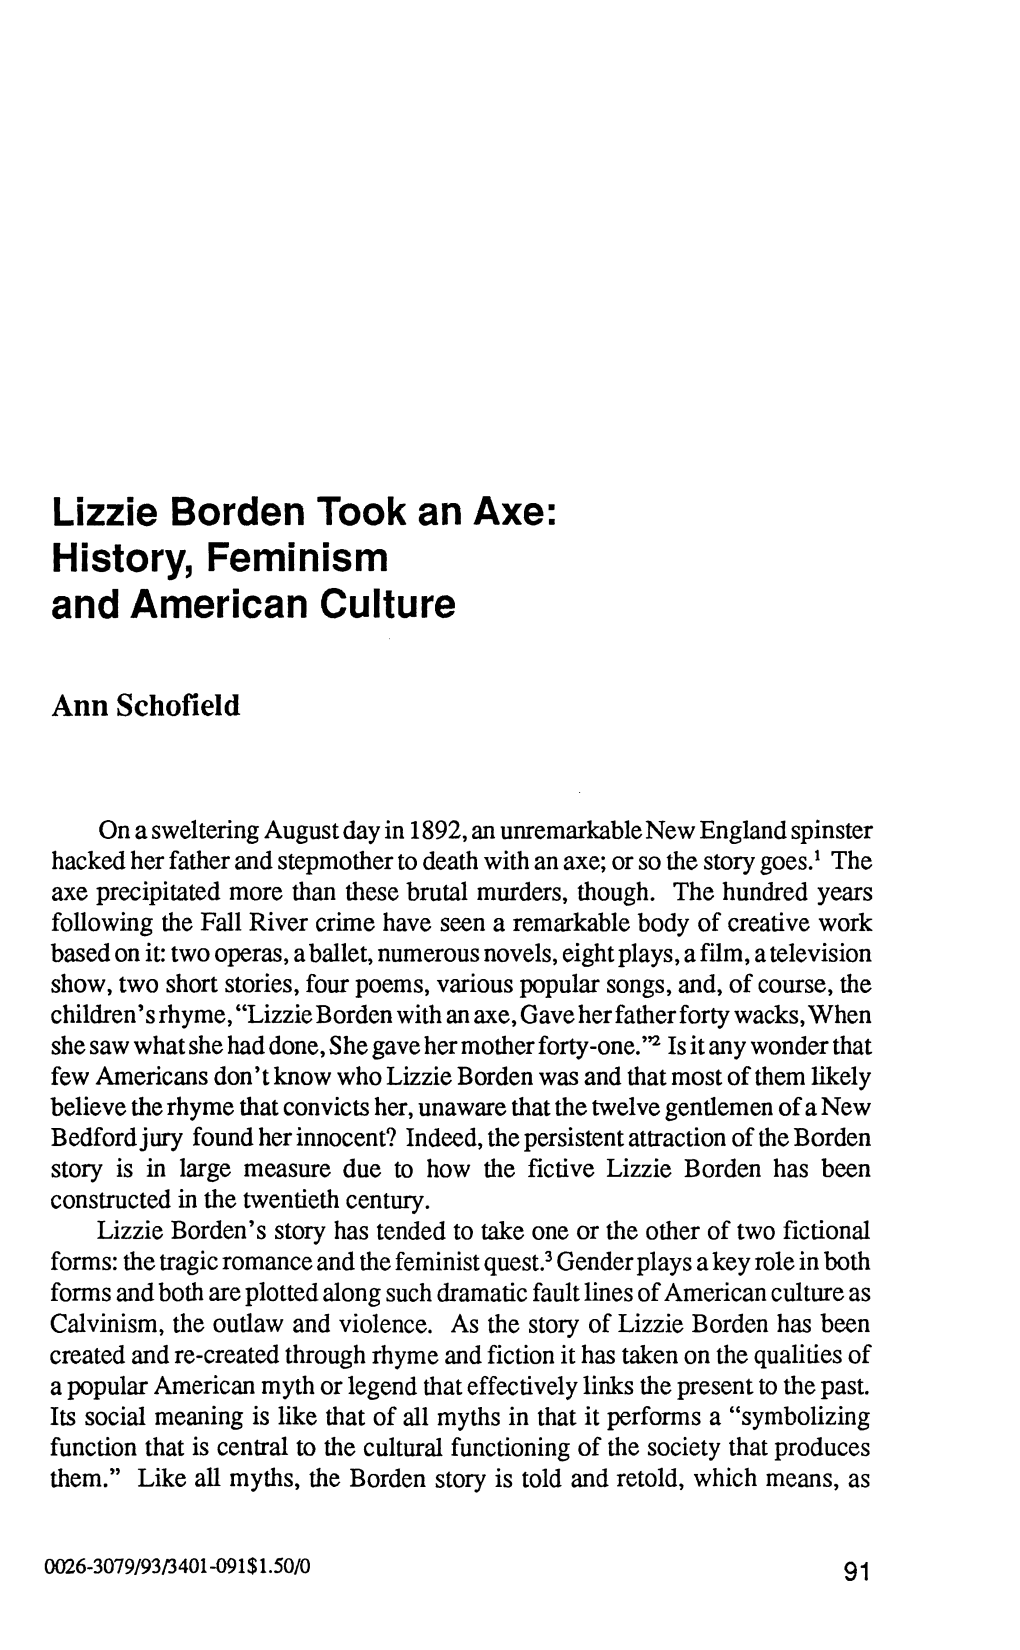 Lizzie Borden Took an Axe: History, Feminism and American Culture